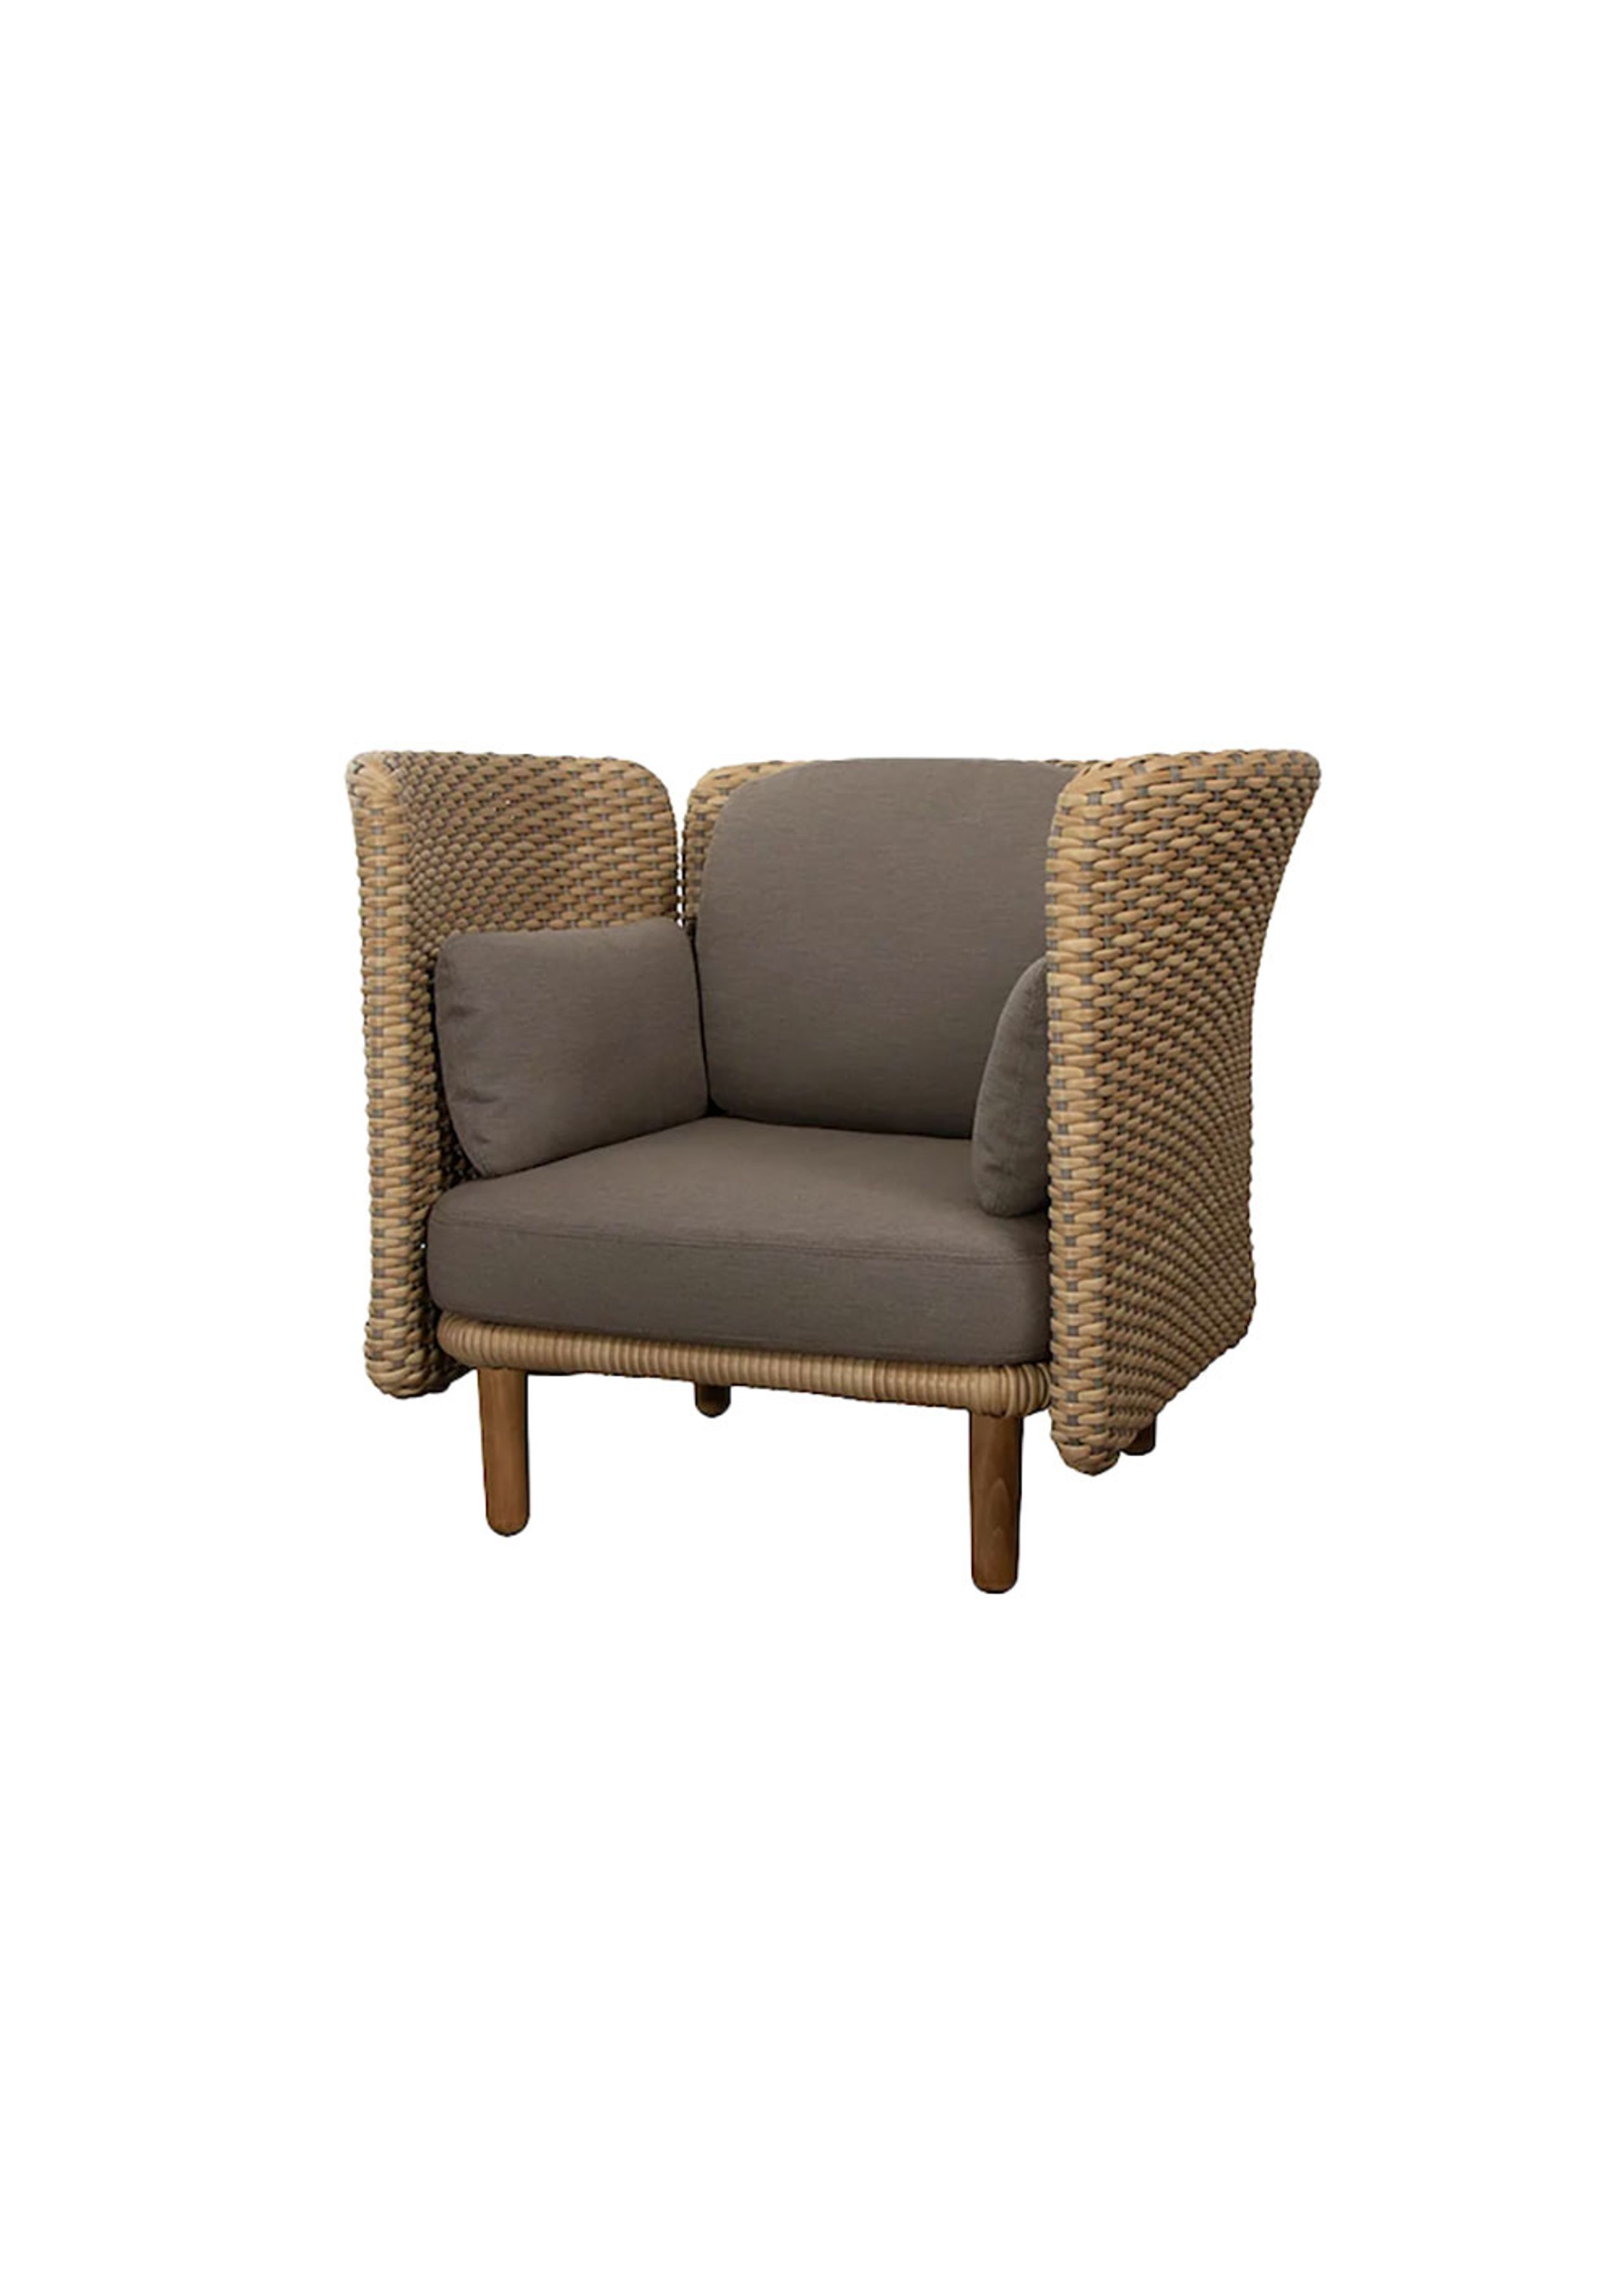 Cane-line - Lounge chair - Arch Lounge Chair w. Low Arm/Backrest - Natural/Taupe, Cane-line Flat Weave